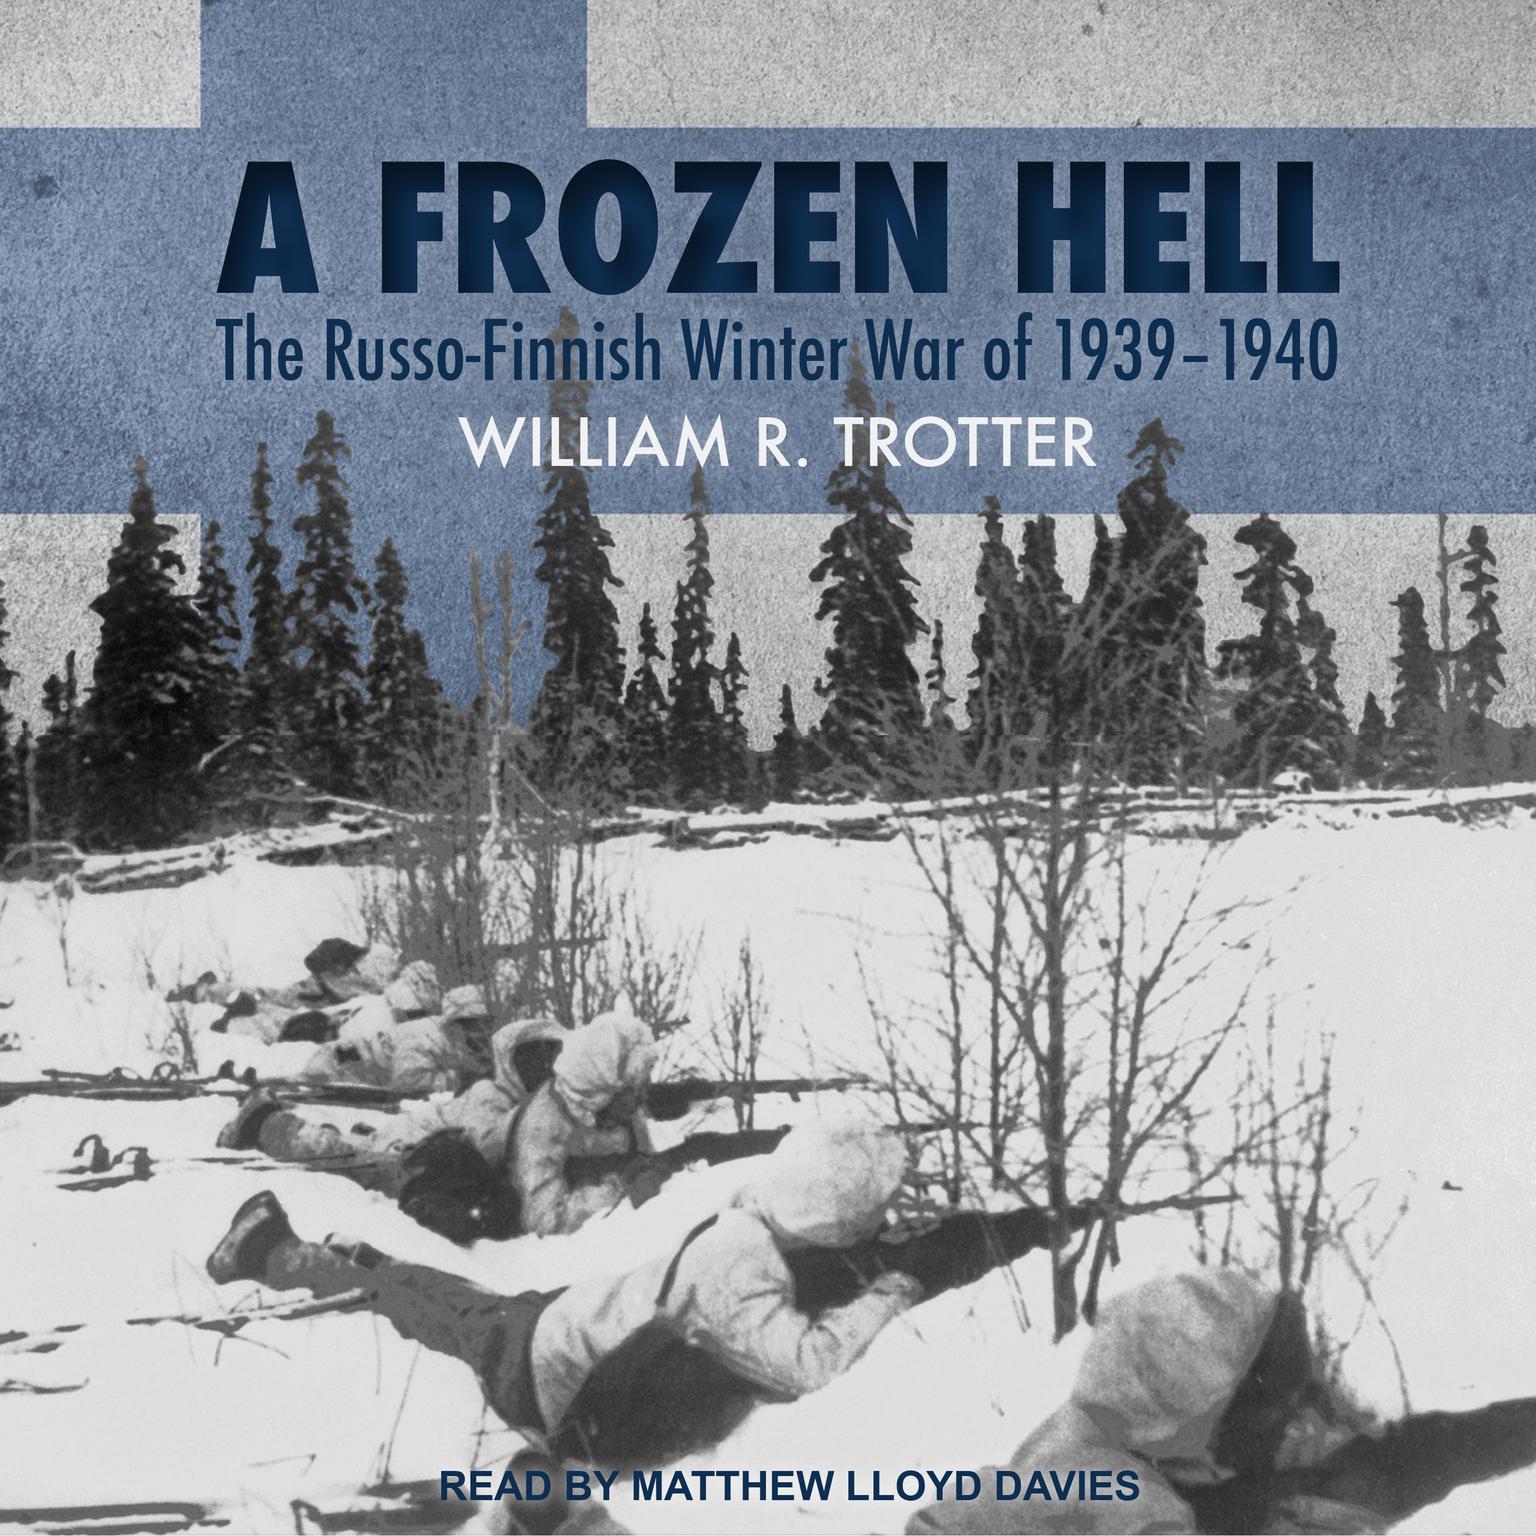 A Frozen Hell: The Russo-Finnish Winter War of 1939-1940 Audiobook, by William R. Trotter